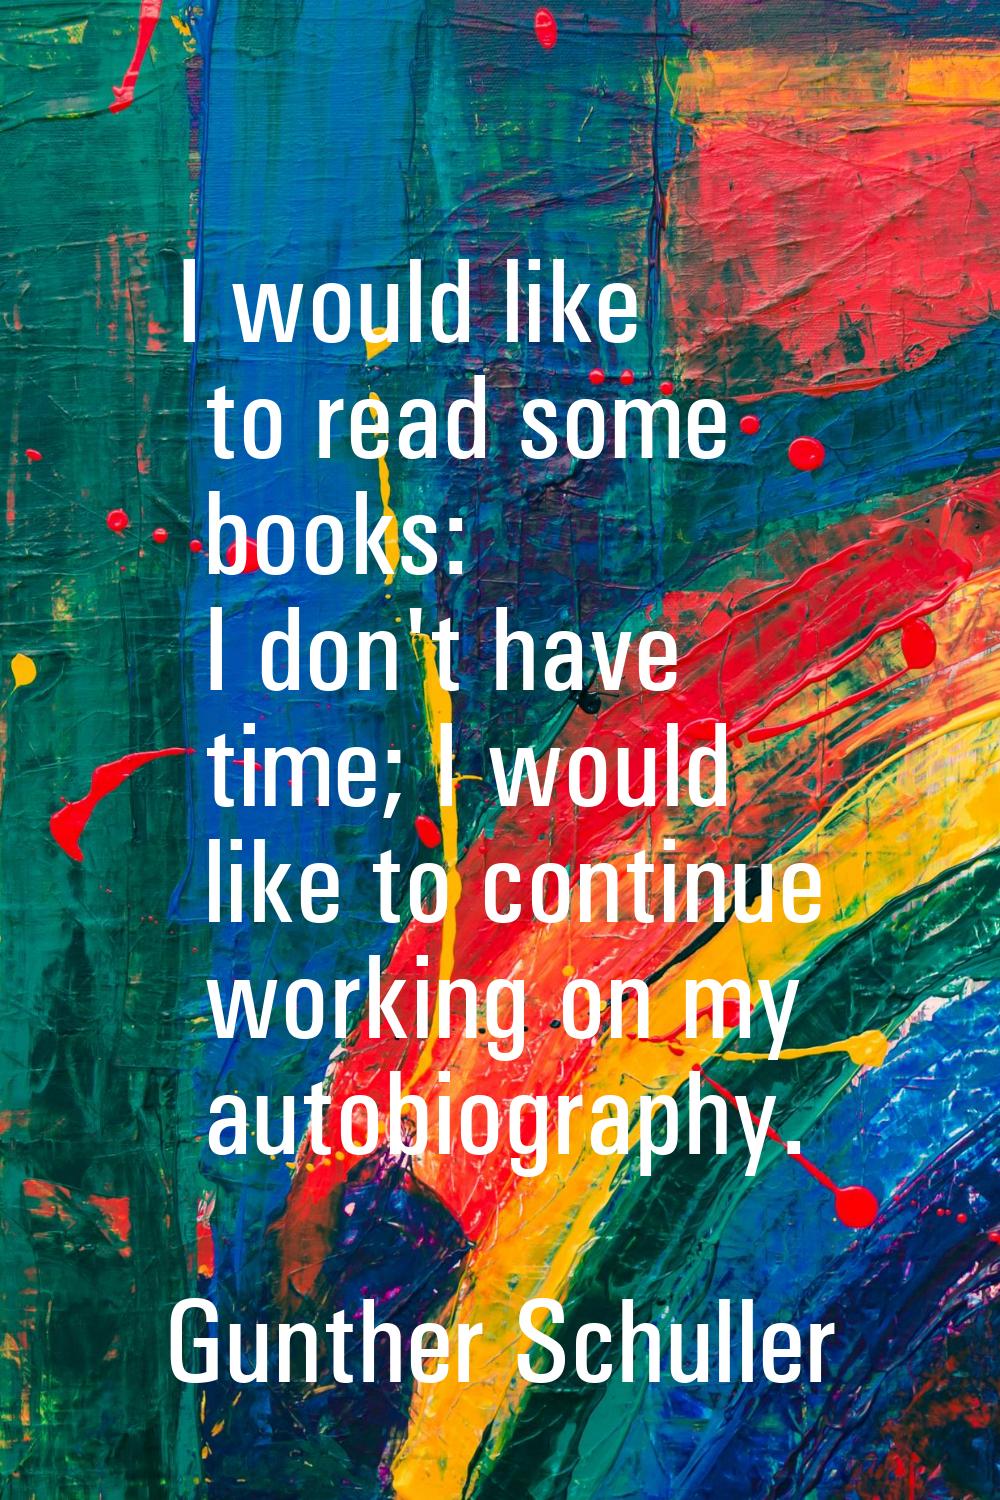 I would like to read some books: I don't have time; I would like to continue working on my autobiog